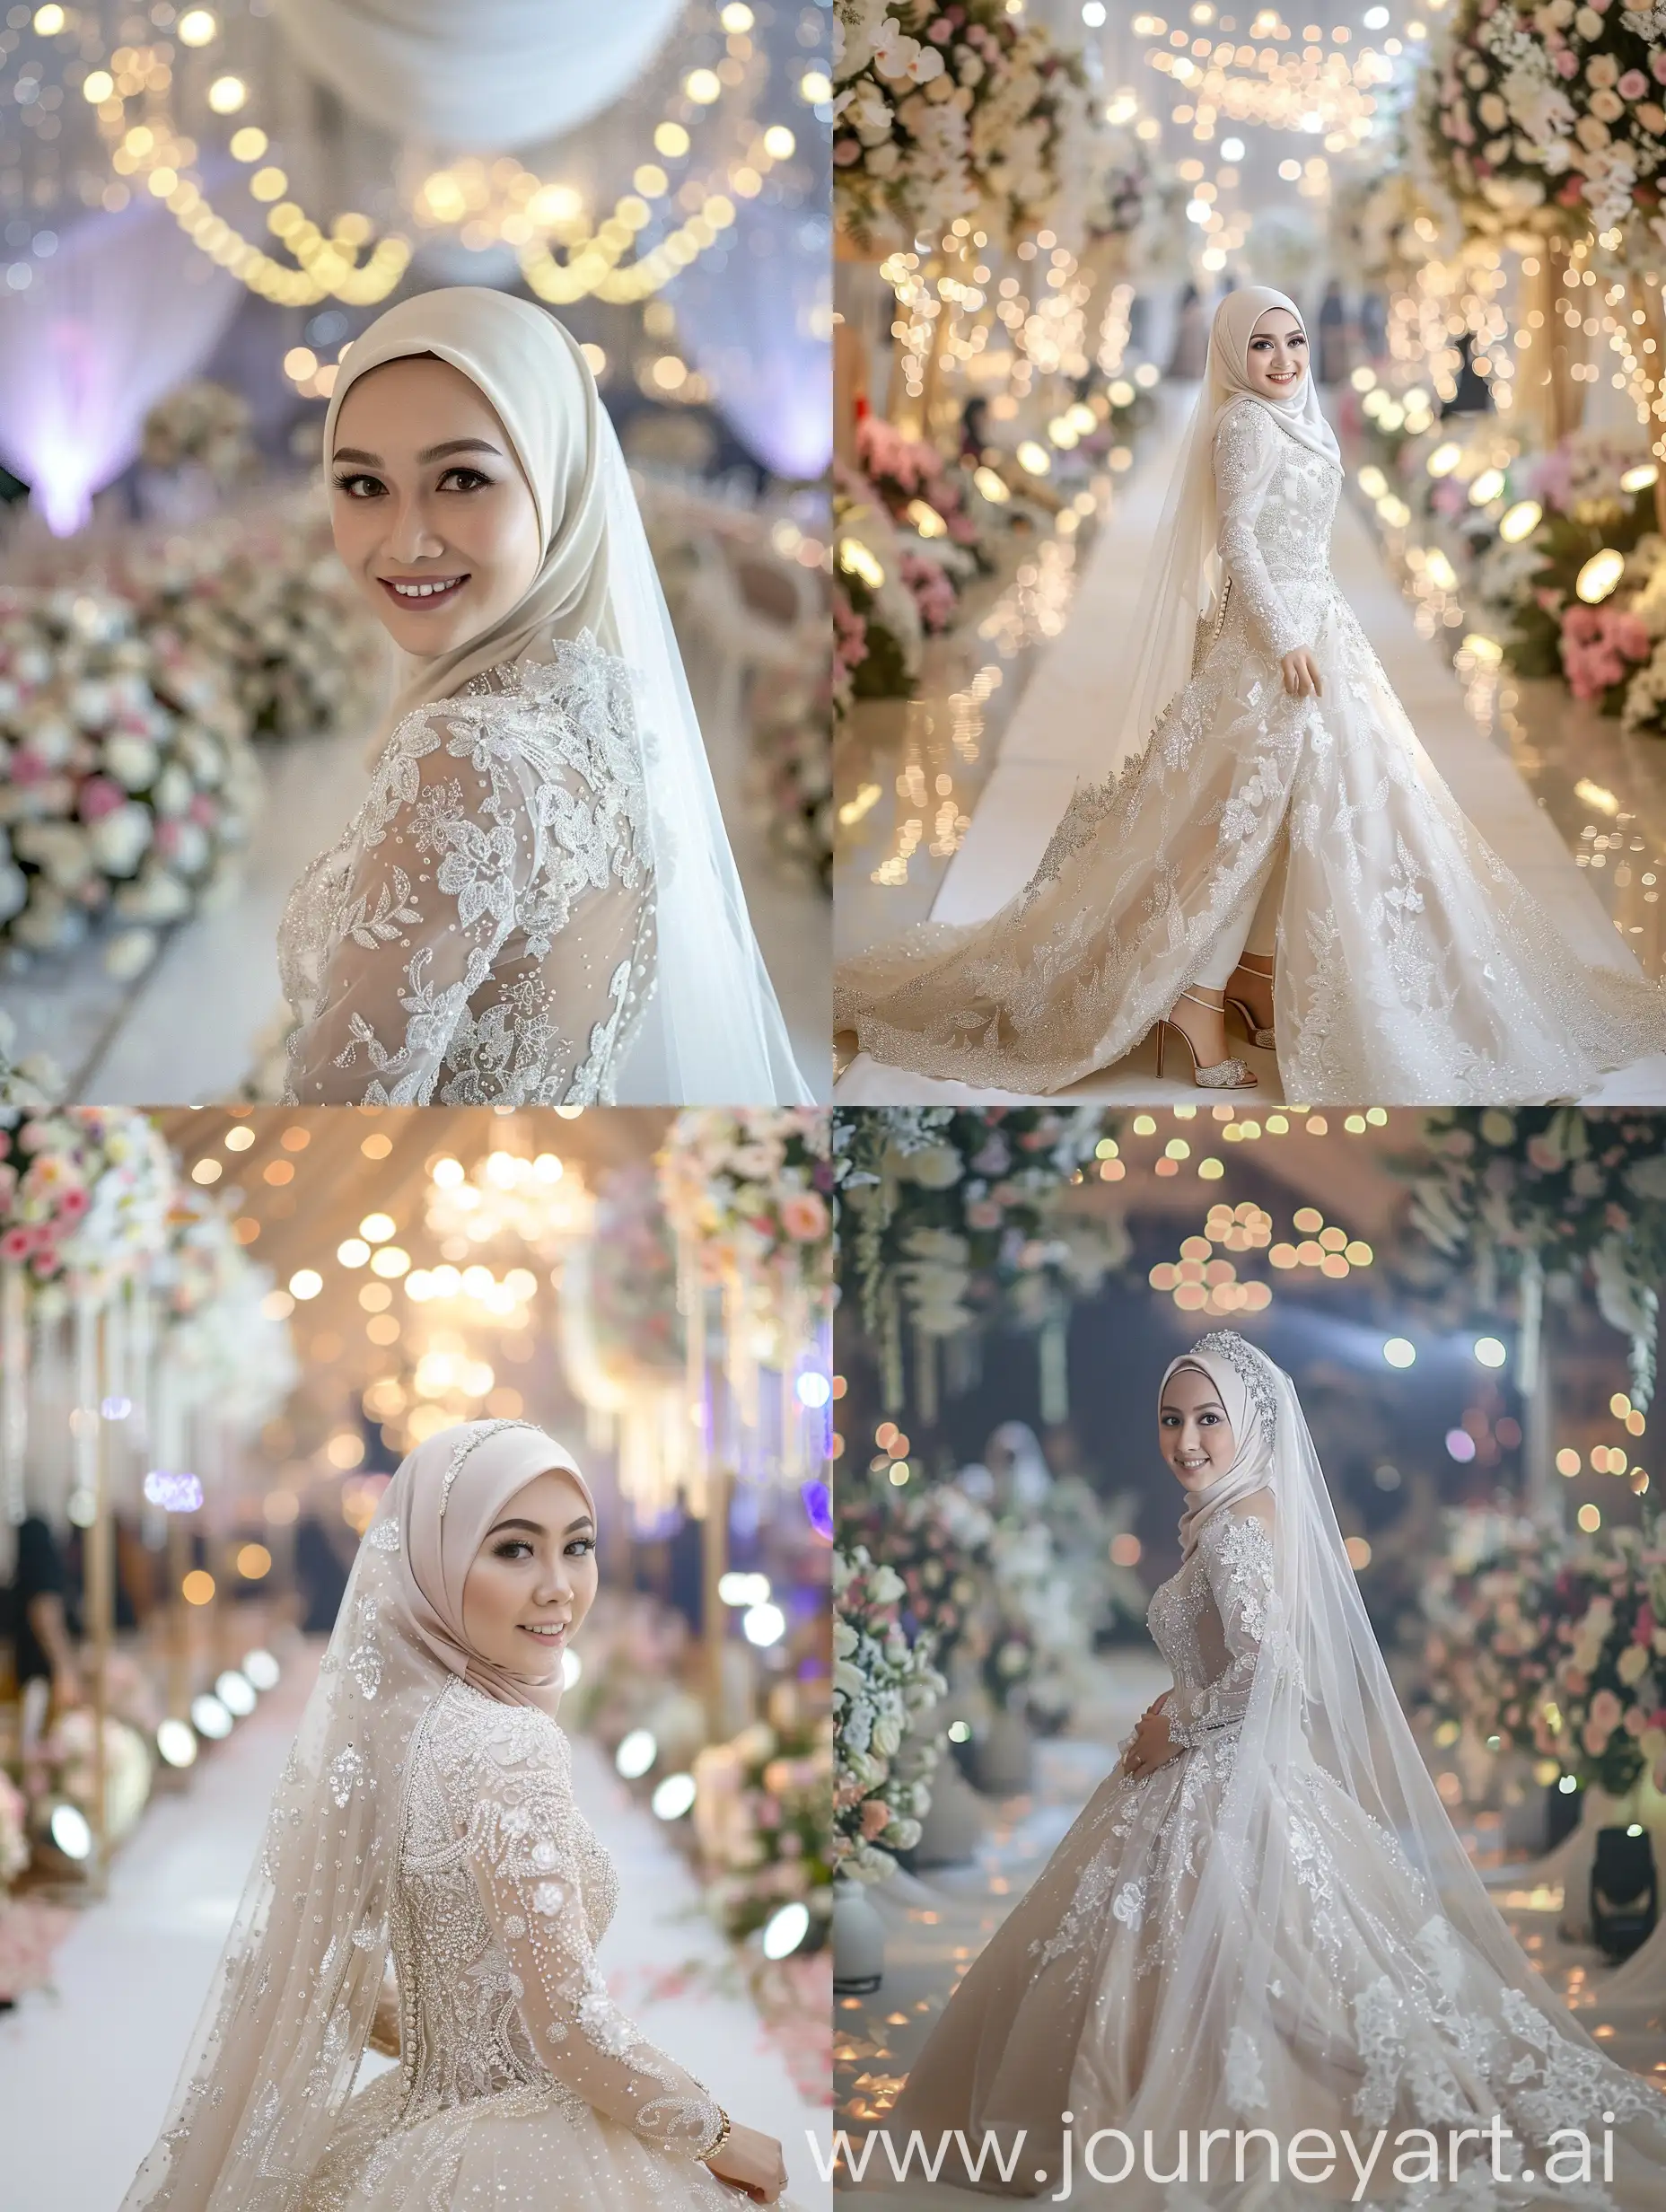 Smiling-Indonesian-Woman-in-Wedding-Dress-with-Hijab-and-Bridal-Shoes